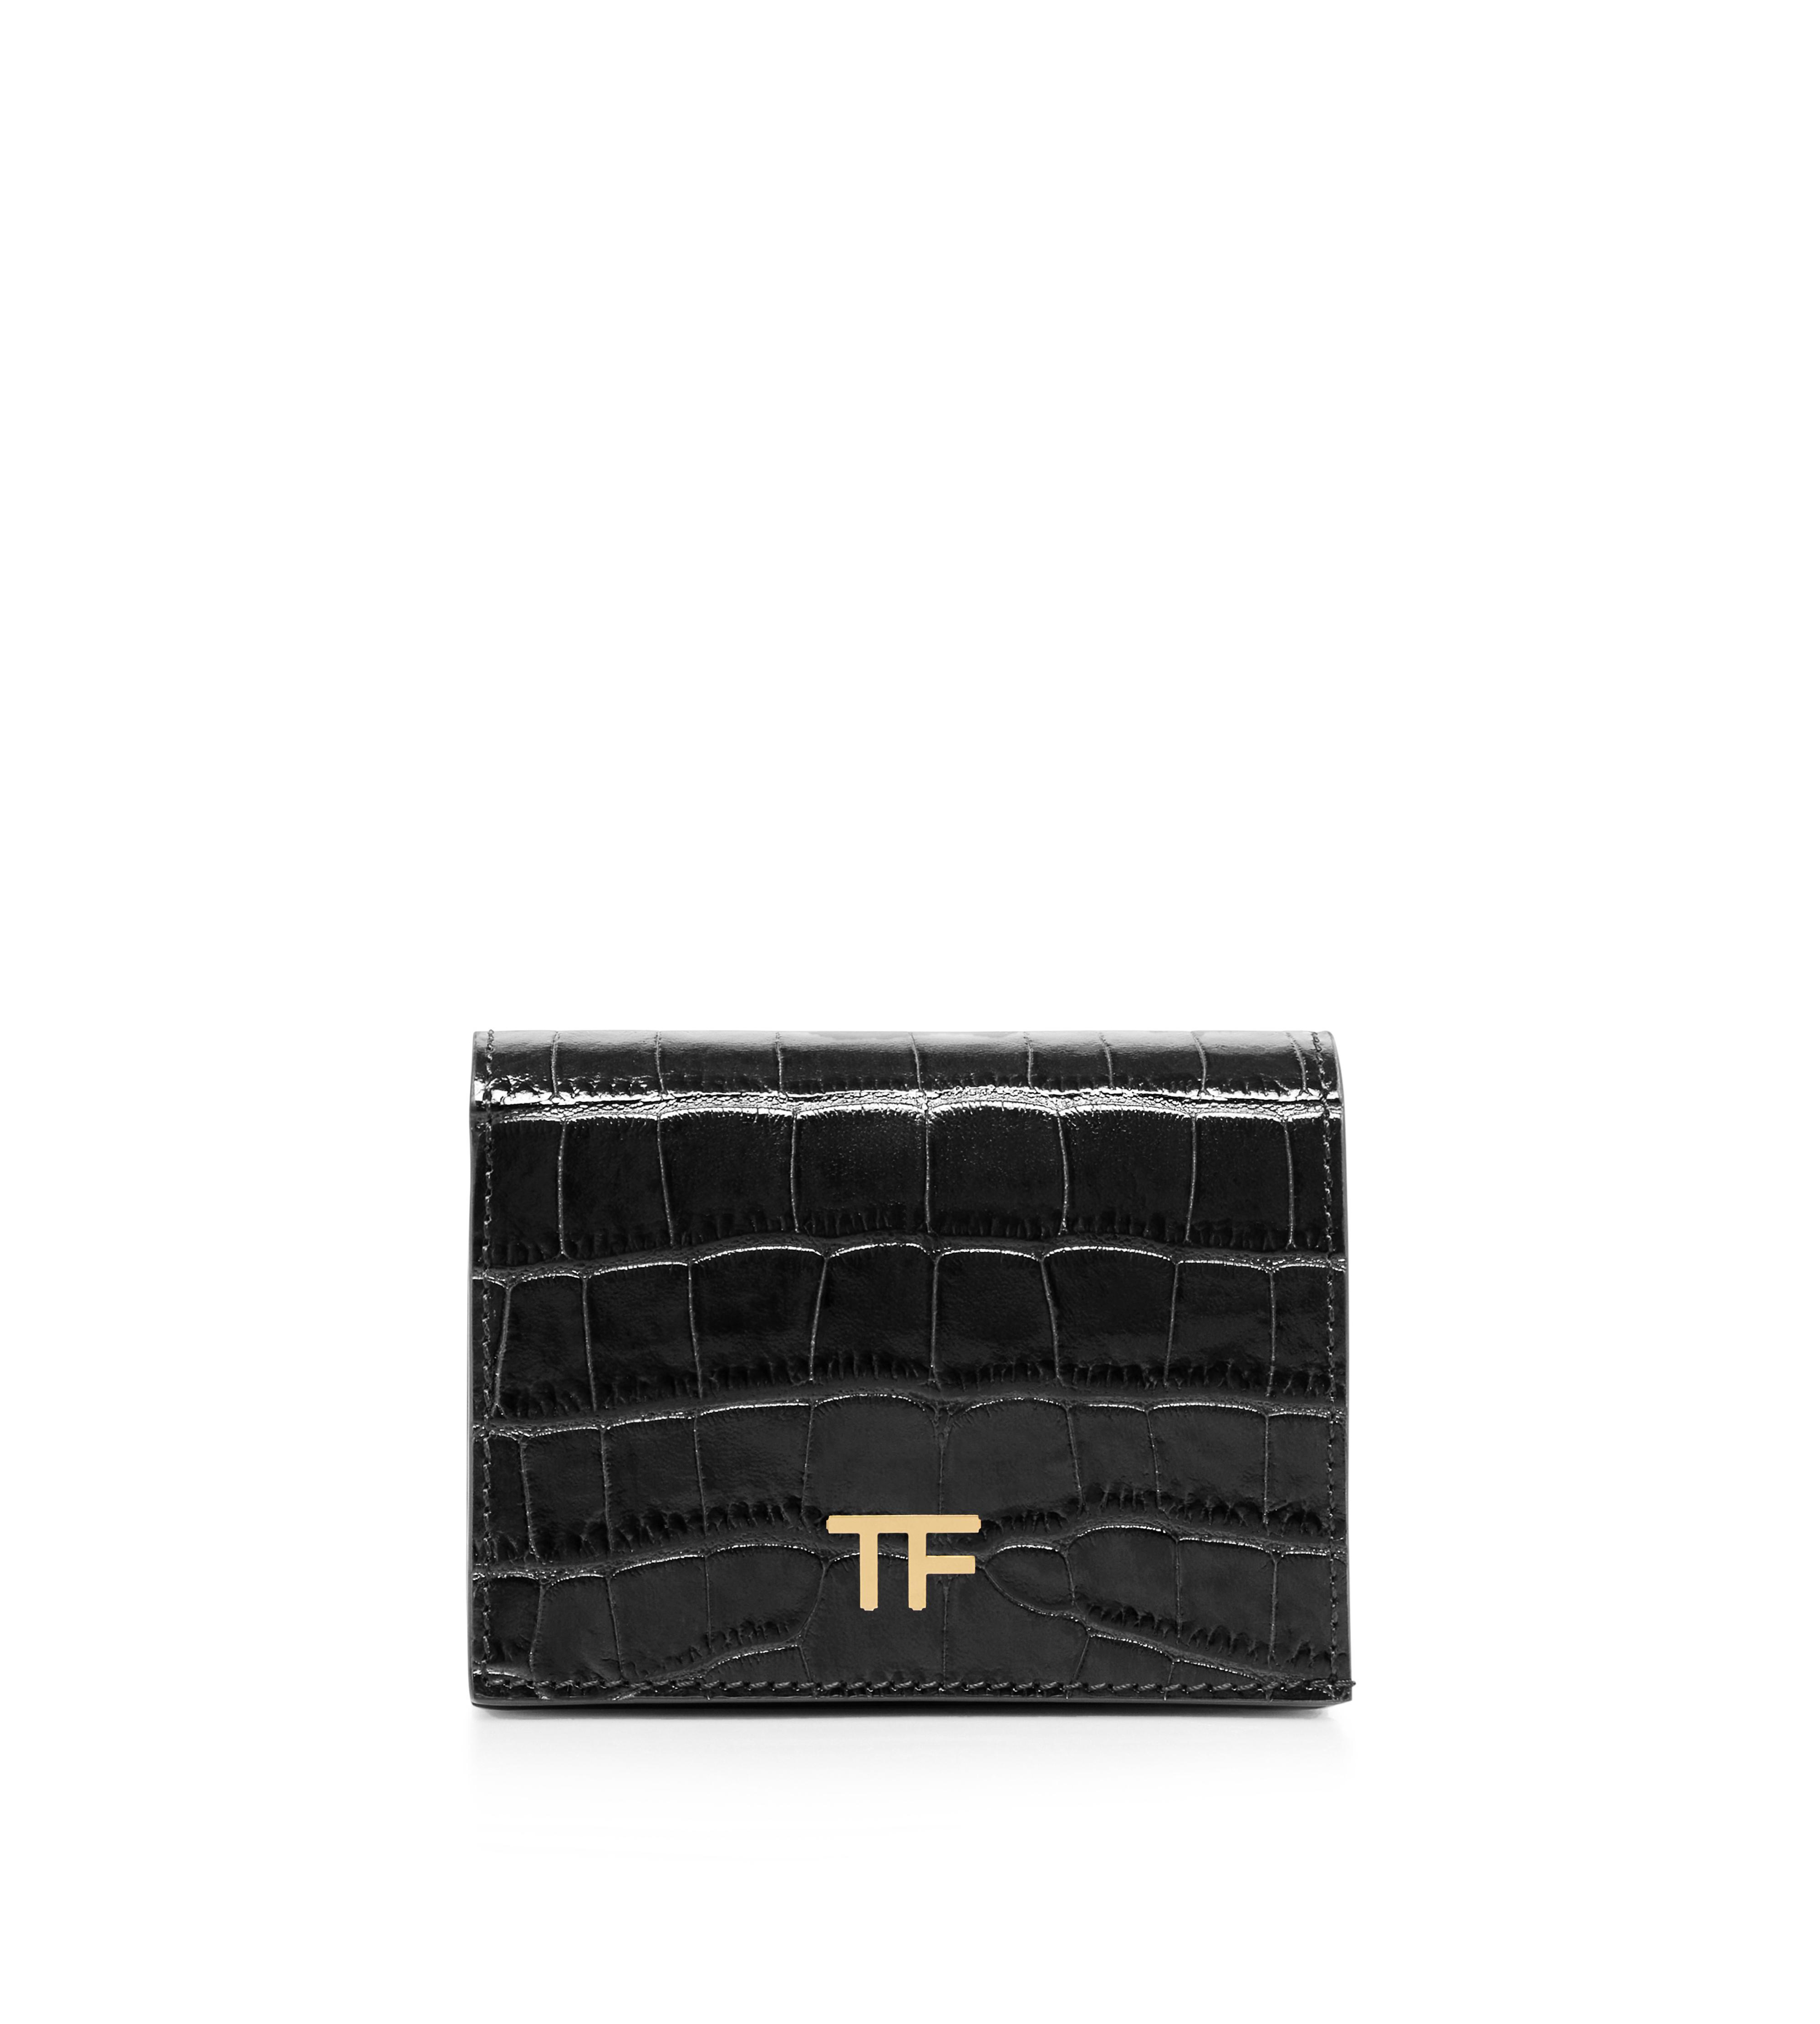 Accessories - TOM FORD | Women's Accessories | TomFord.co.uk